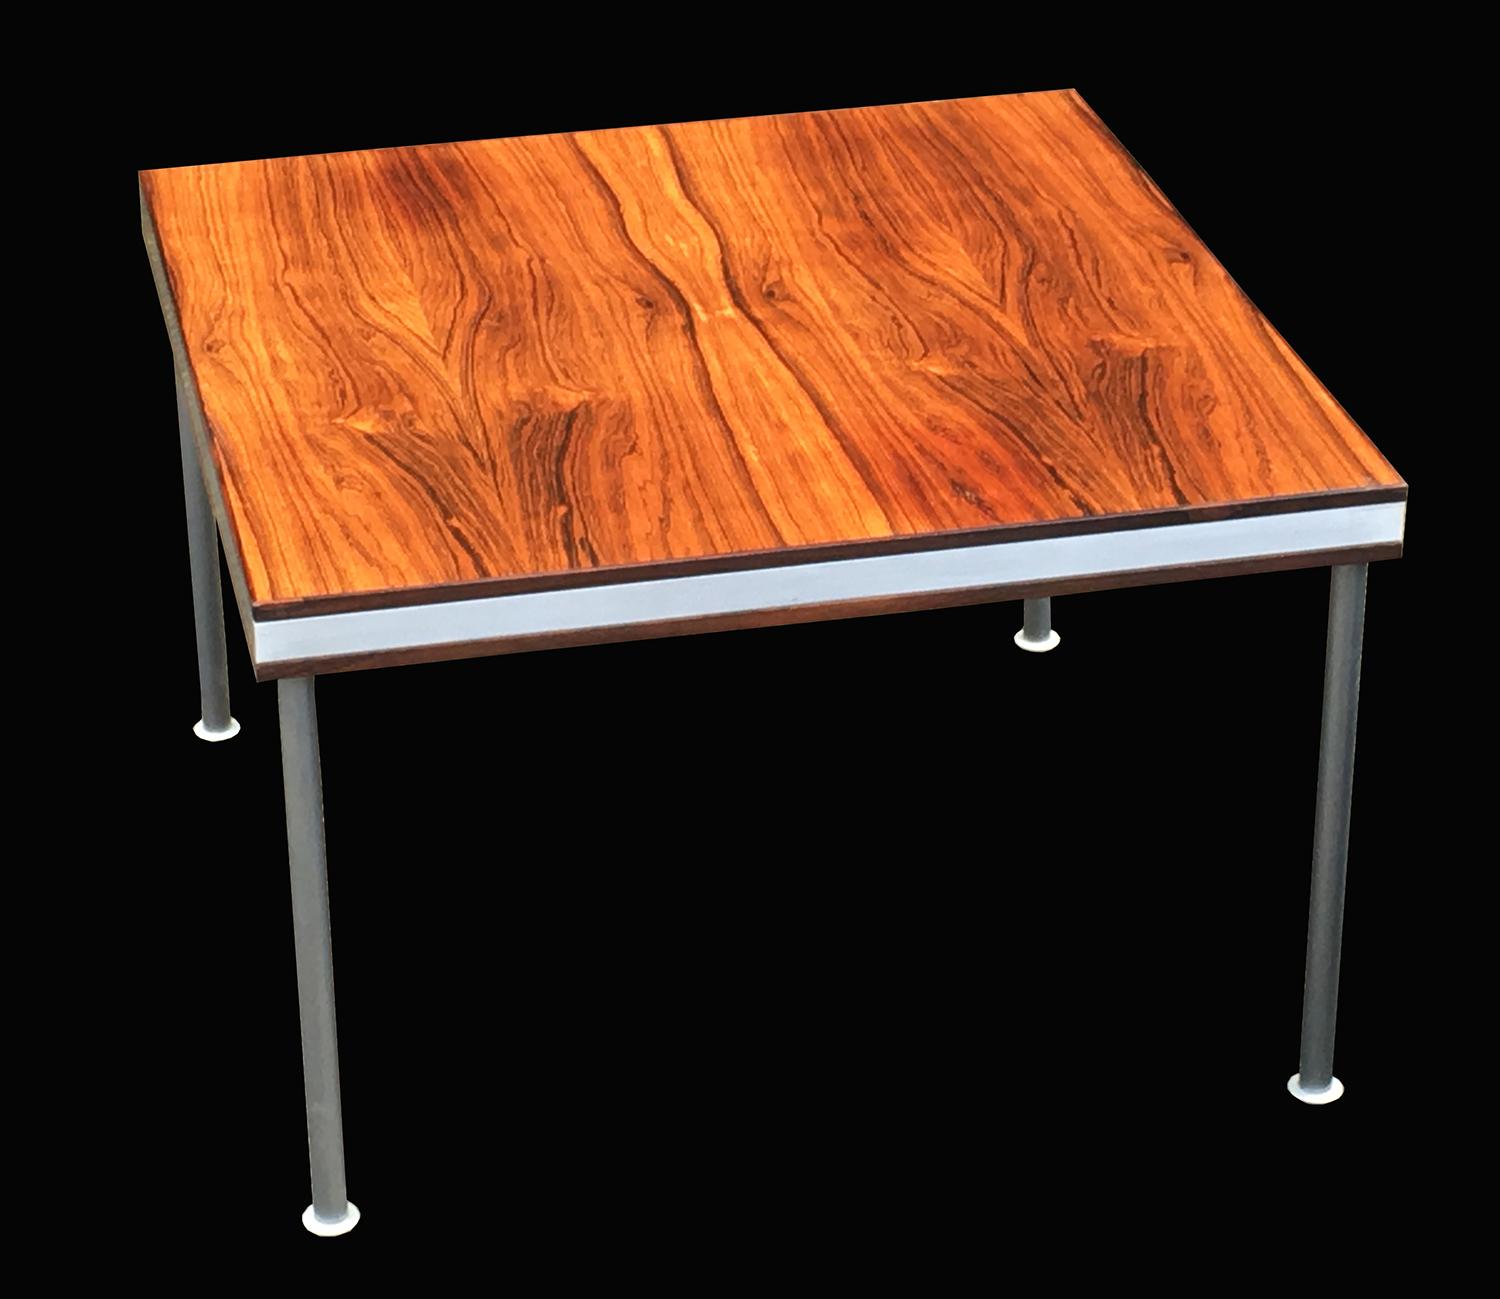 A very nice coffee table, sometimes by Poul Cadovious, the nicely figured Santos Rosewood ( a species which does not require CITES certification) with aluminium edges and legs. A very nice example in great condition and with an especially nice color